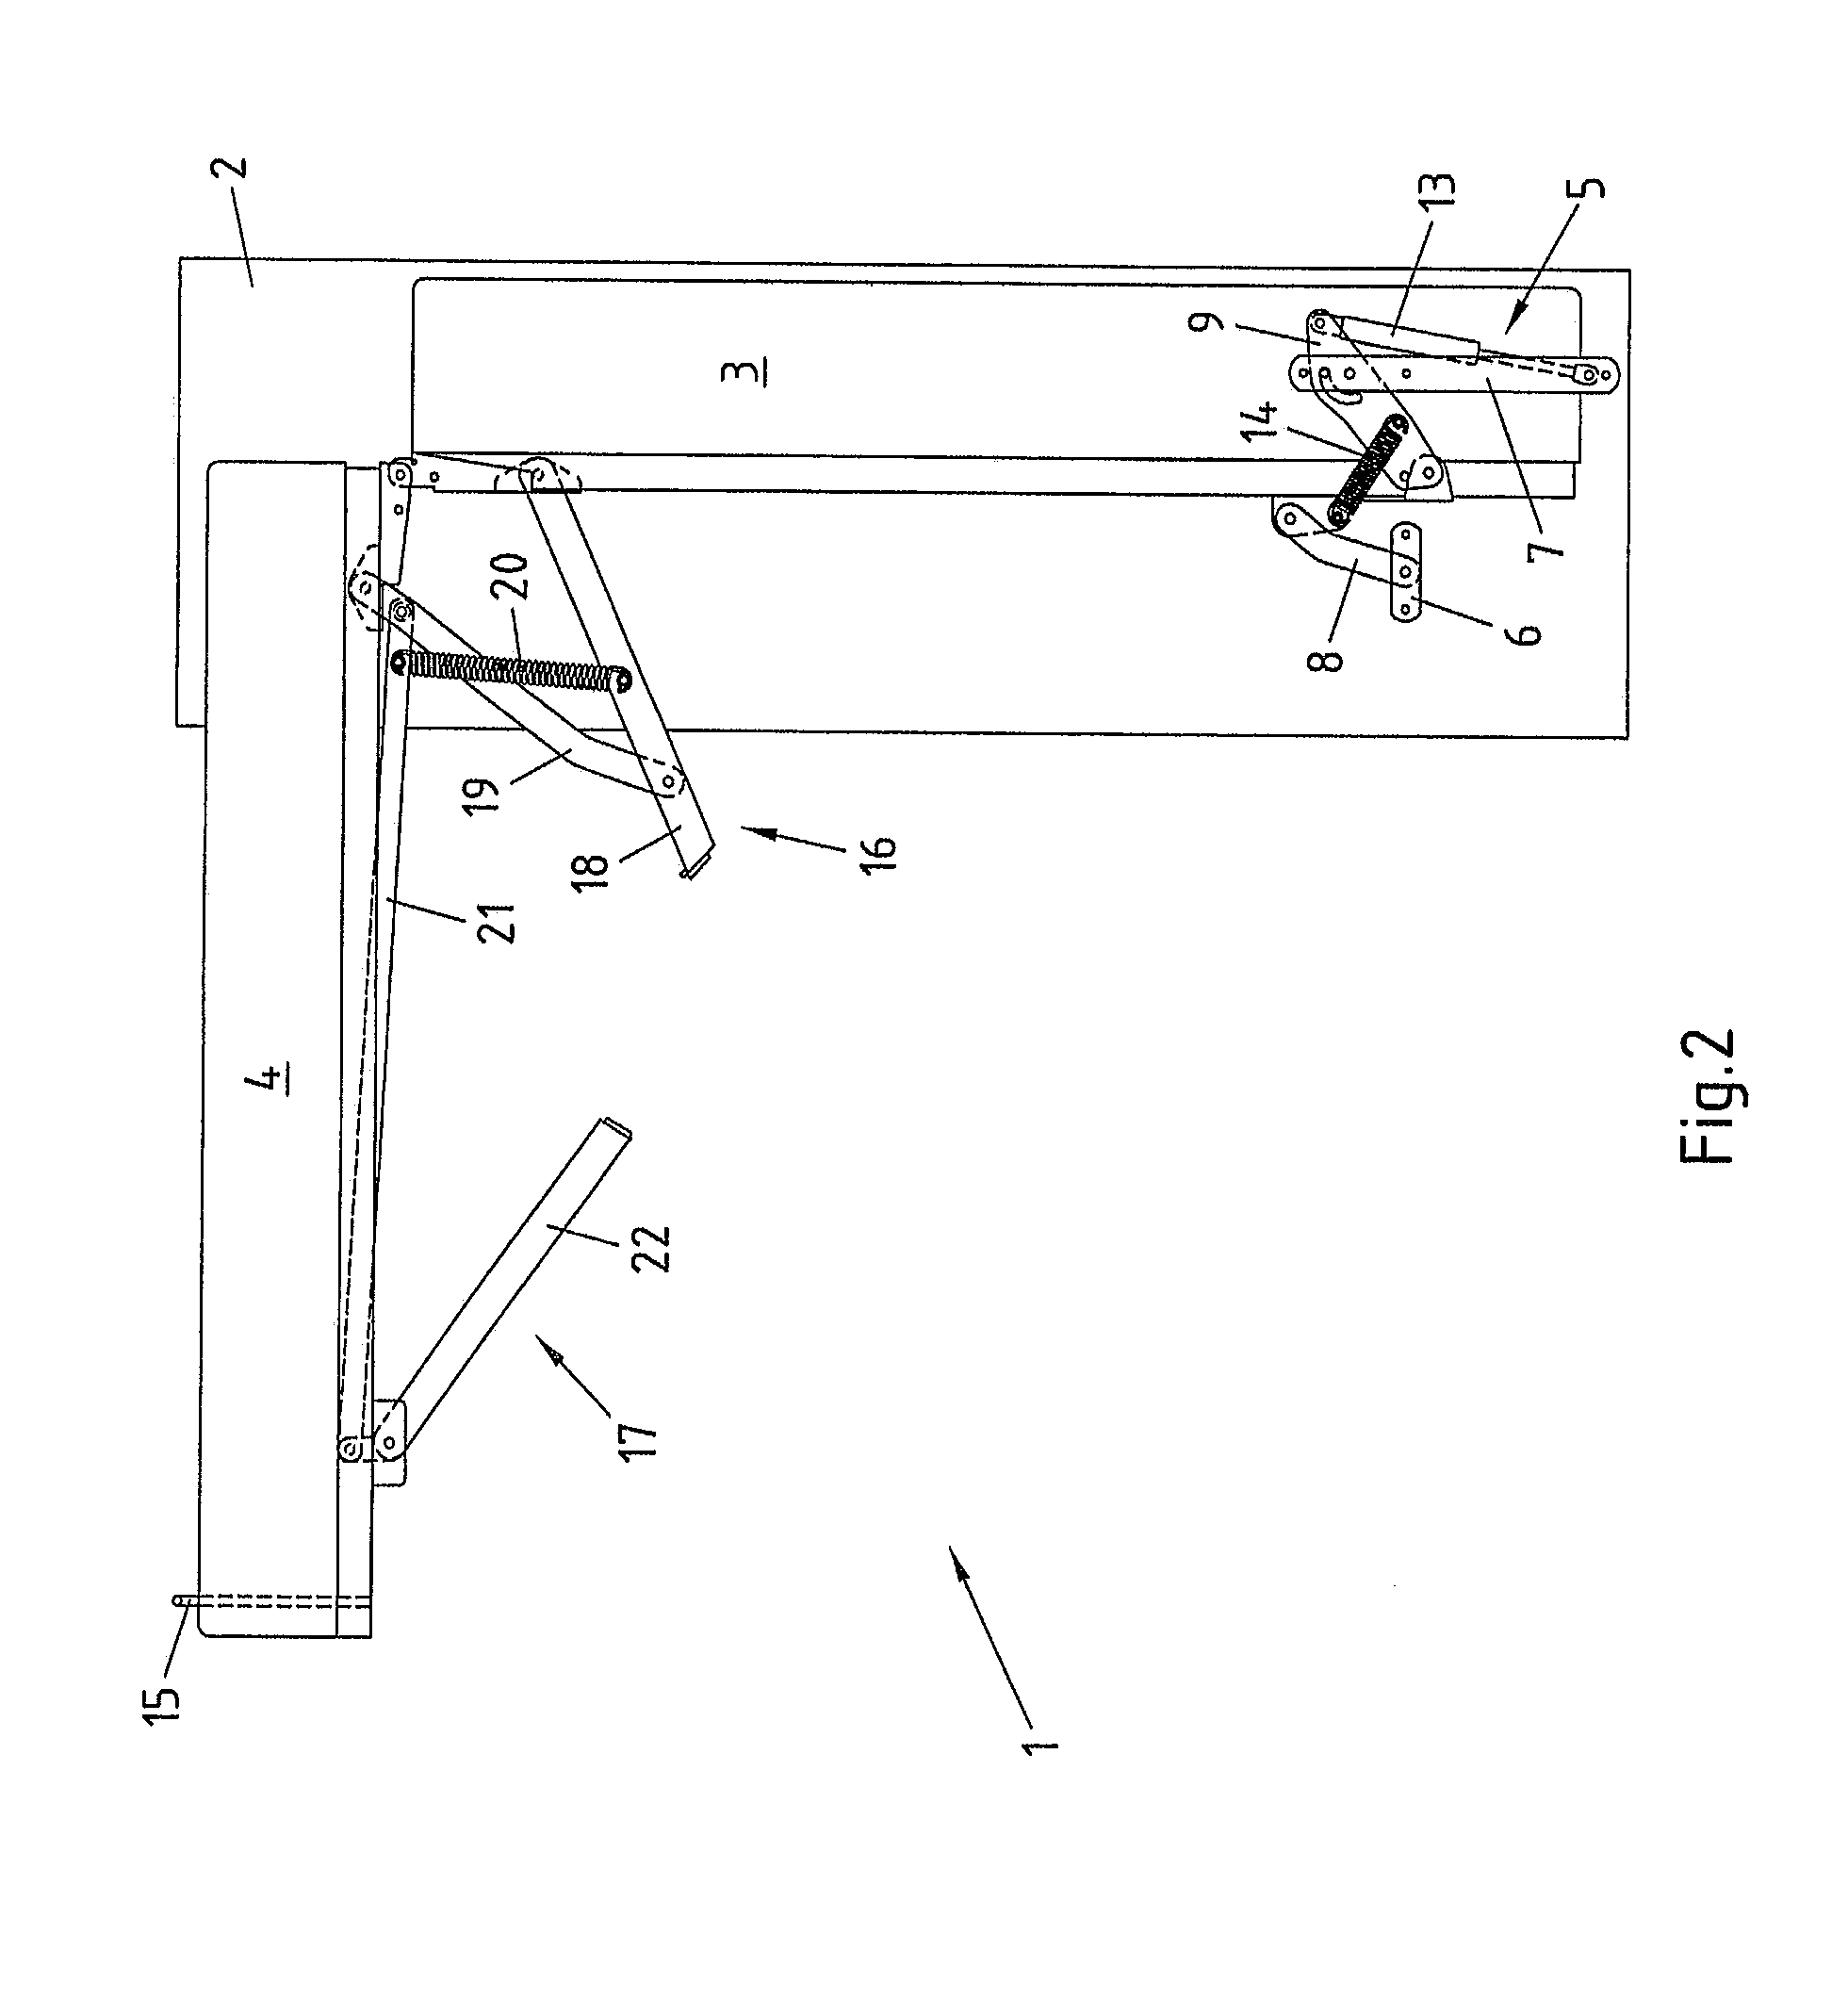 Folding bed with a control lever arranged between a cabinet unit and a head part